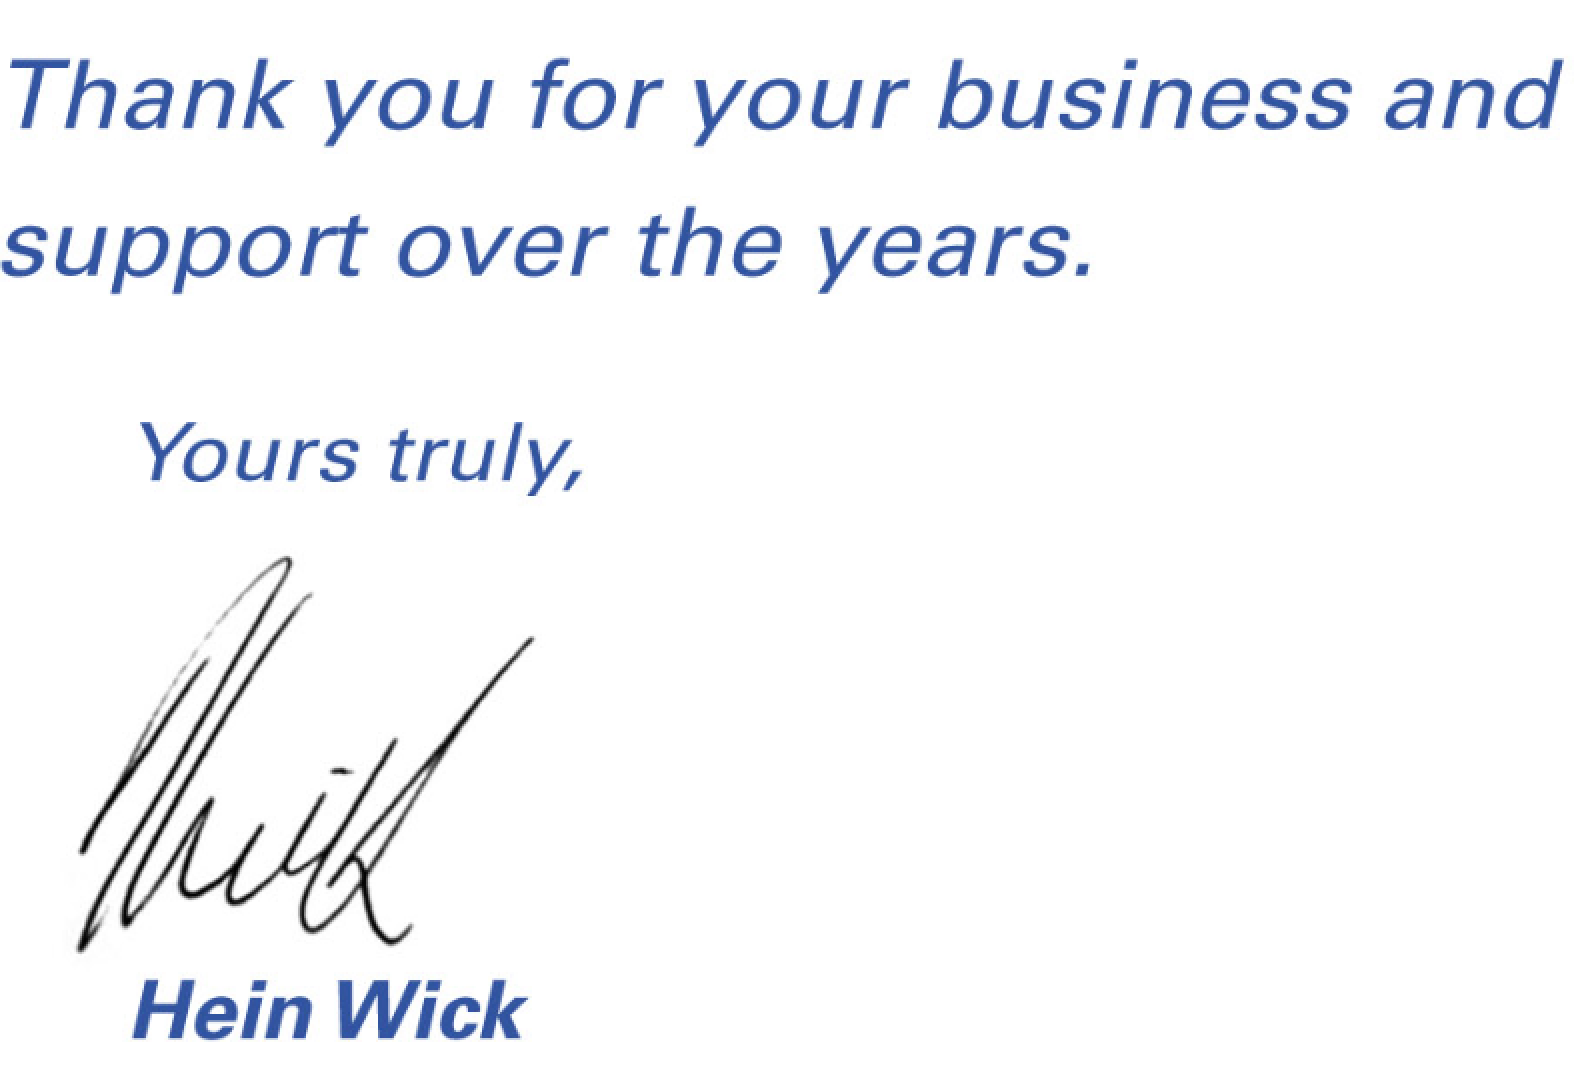 Thank you for your business and support over the years.Yours truly,Hein Wick